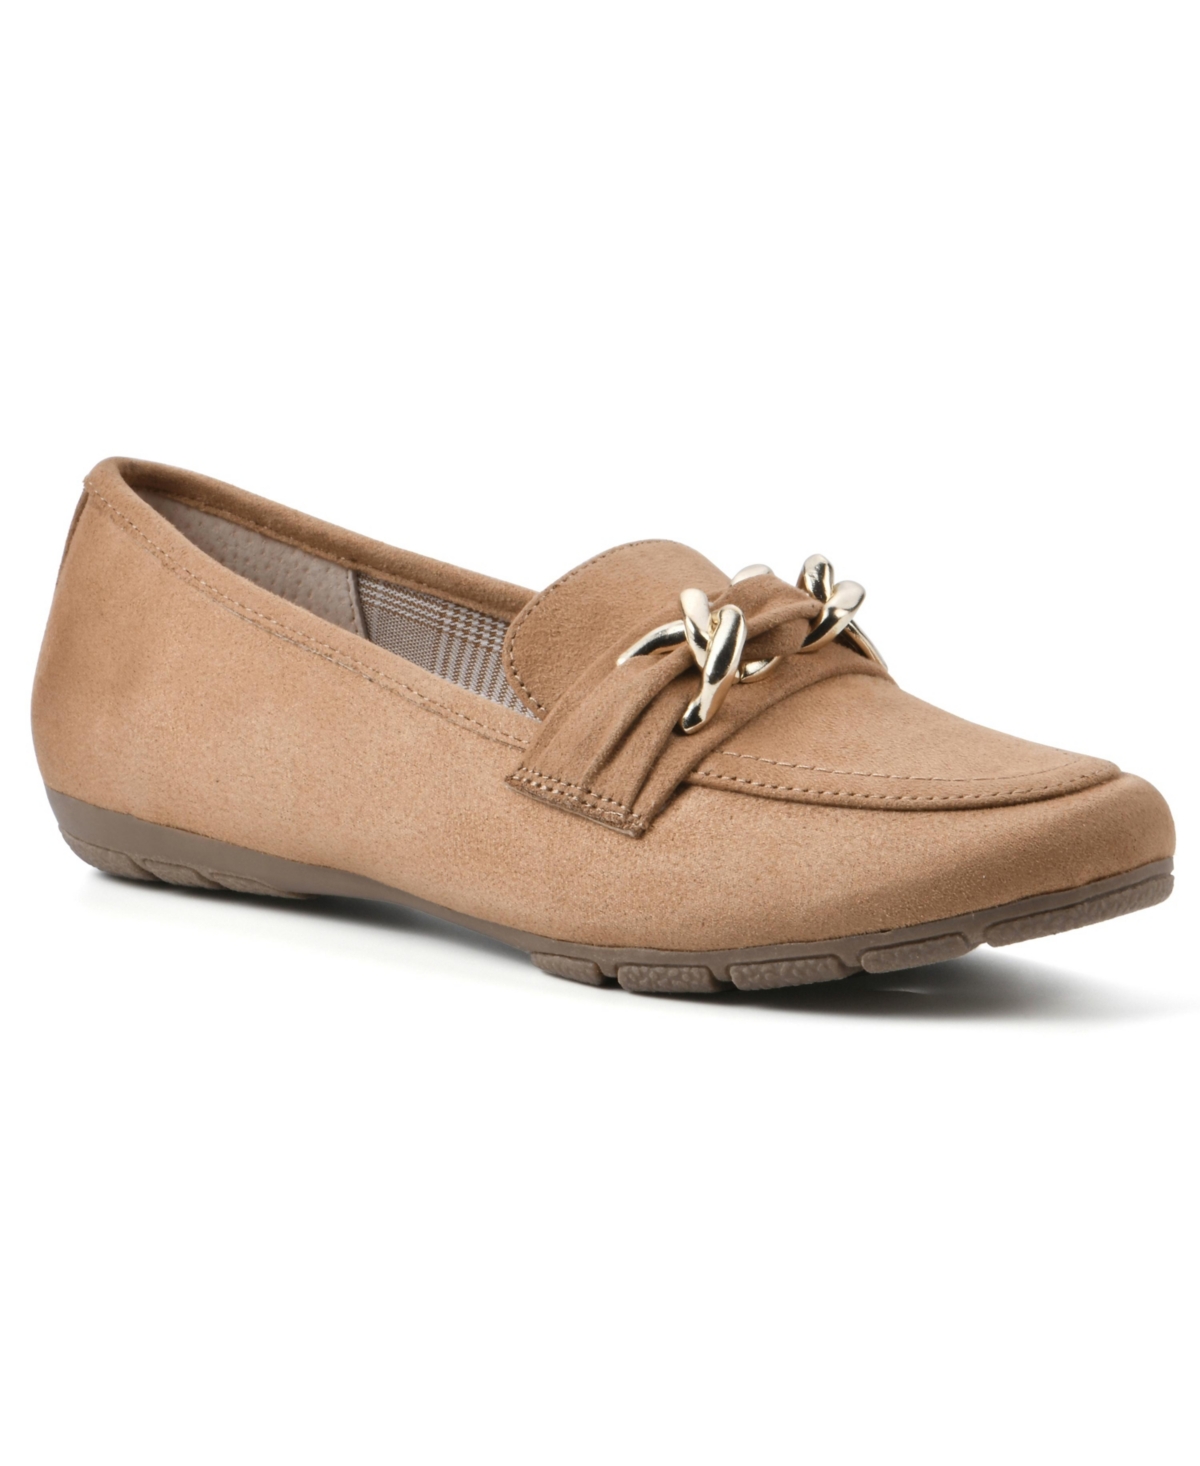 Women's Gainful Loafers - Natural Suedette